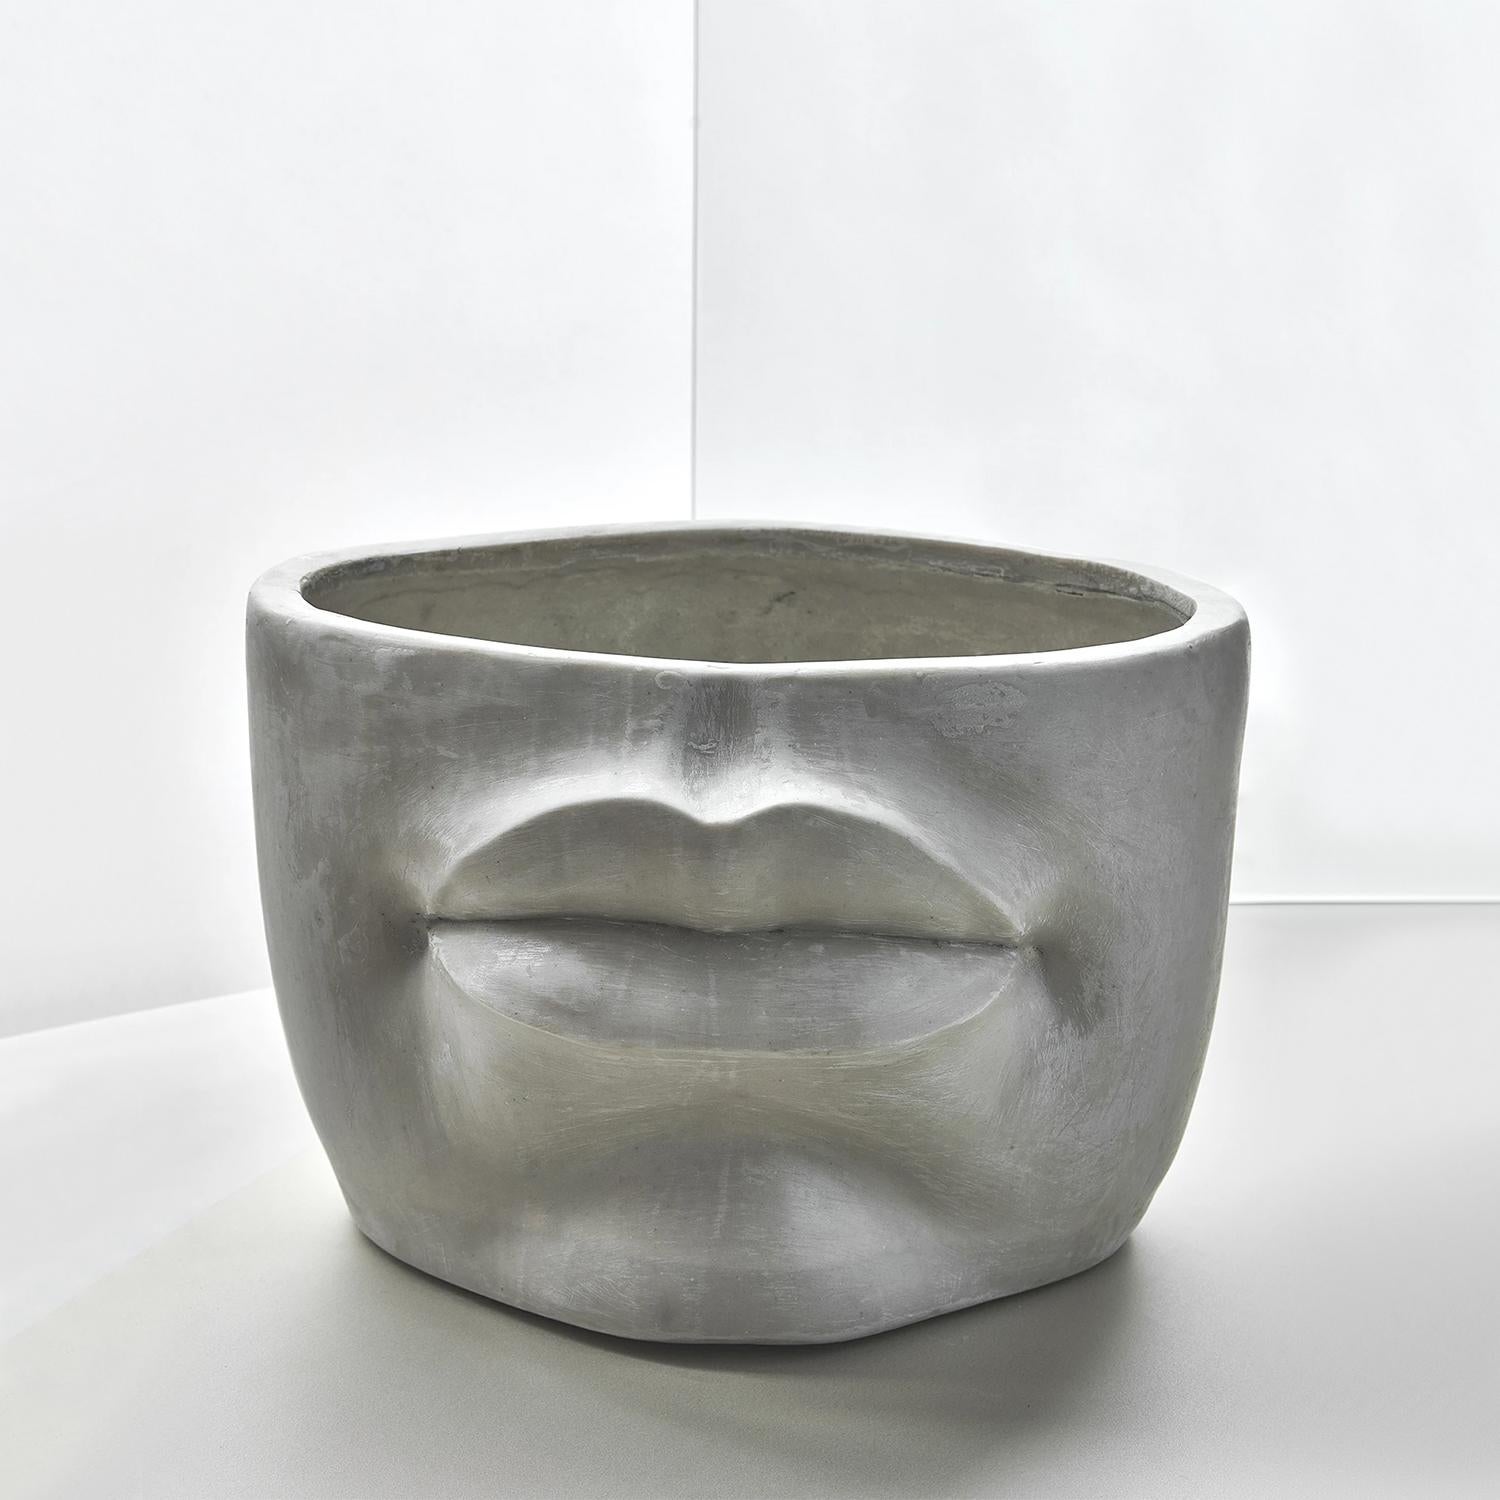 Bowl mouth all made in moleded resin
and stone alloy, subtle decoration pieces.